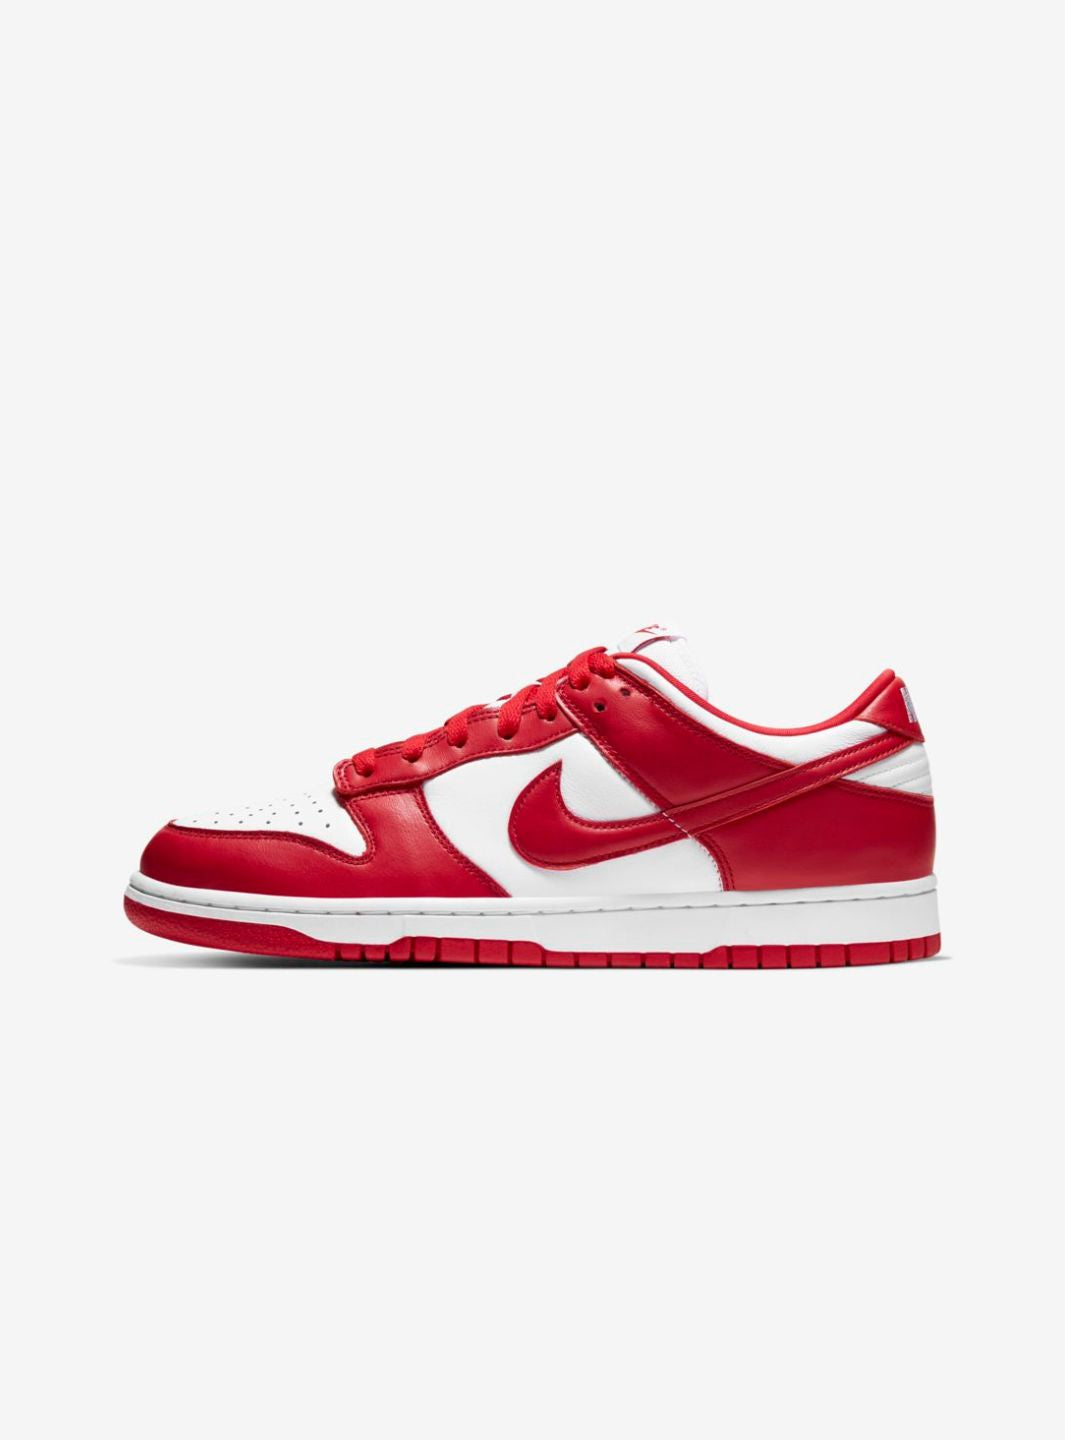 Nike Dunk Low SP St. John's (2020) - CU1727-100 | ResellZone